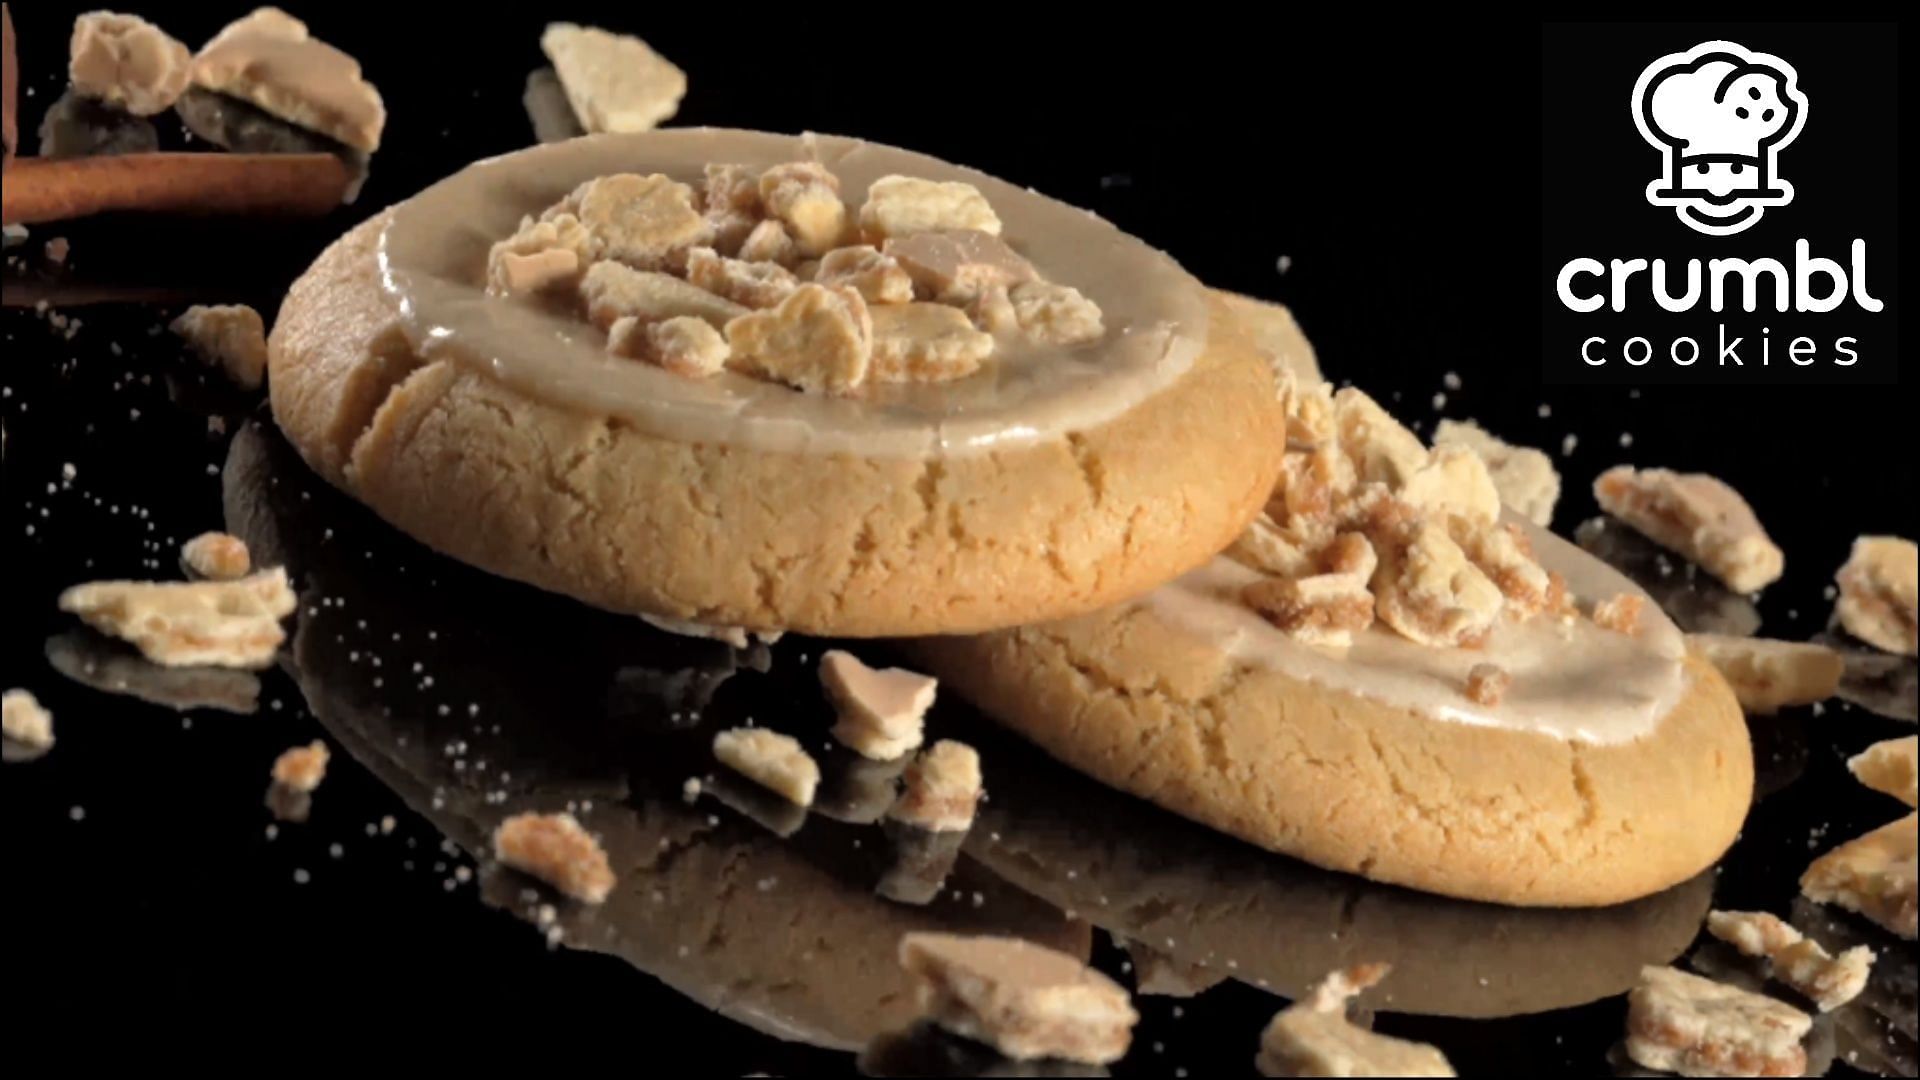 Crumbl Cookies introduces a new Brown Sugar Cinnamon Cookie inspired by Pop-Tarts (Image via Crumbl Cookies)